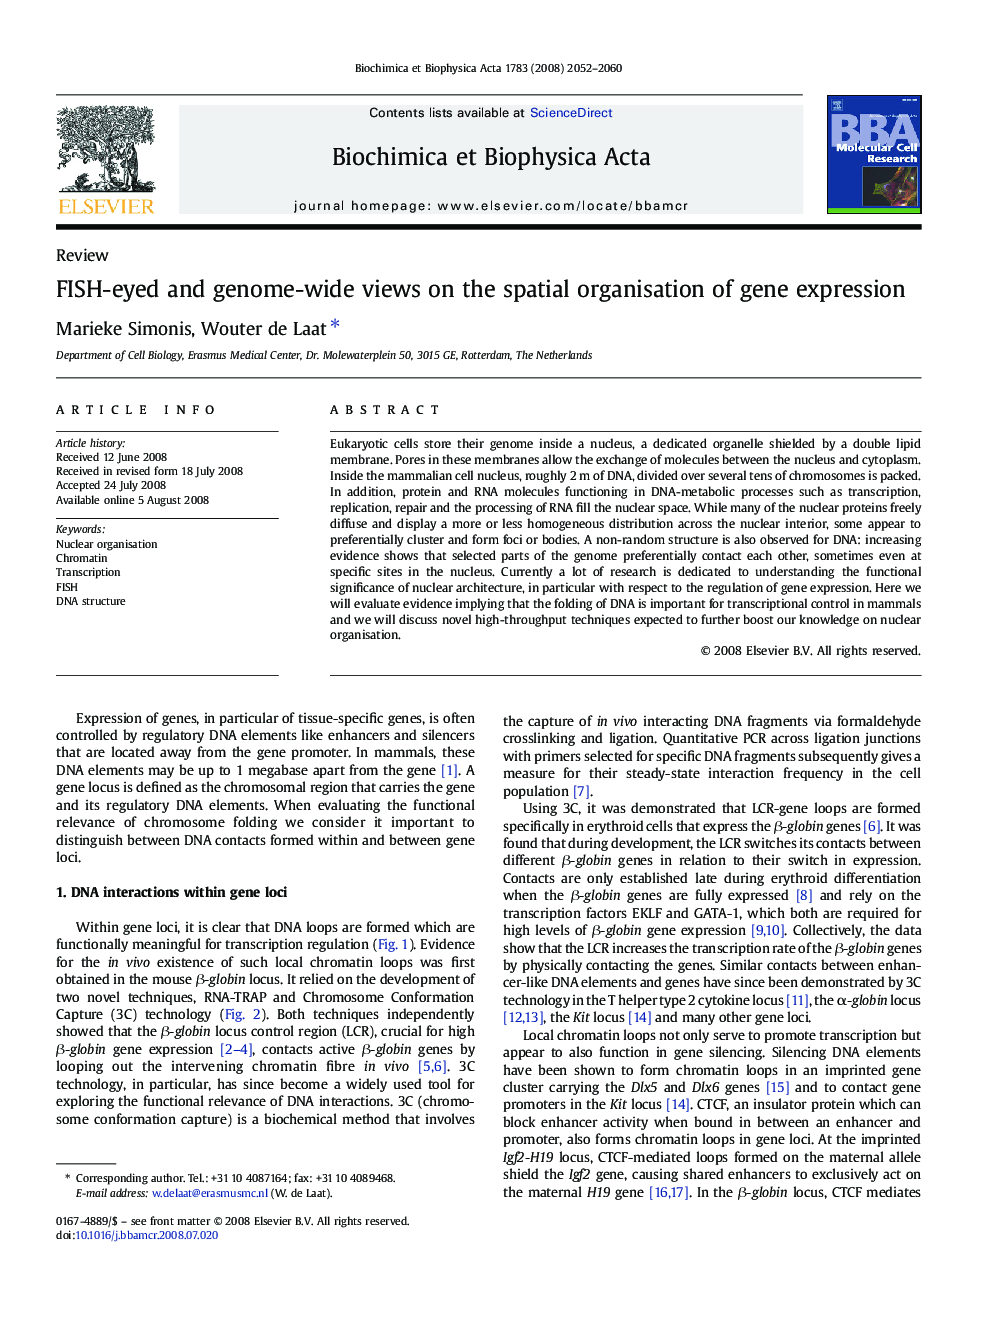 FISH-eyed and genome-wide views on the spatial organisation of gene expression